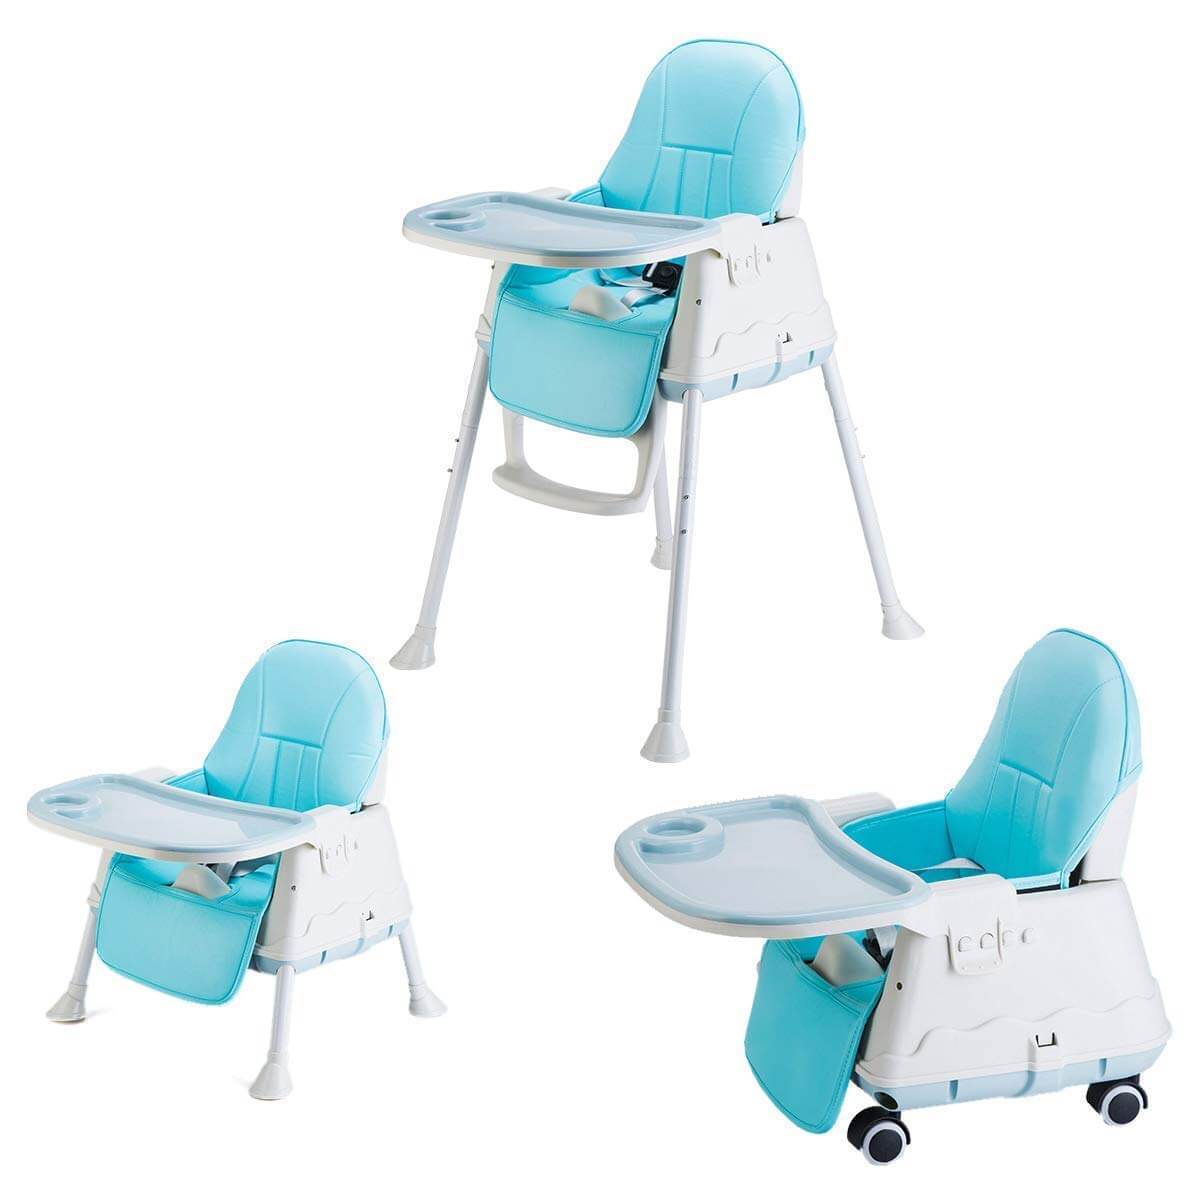 SYGA High Chair for Baby KidsSafety